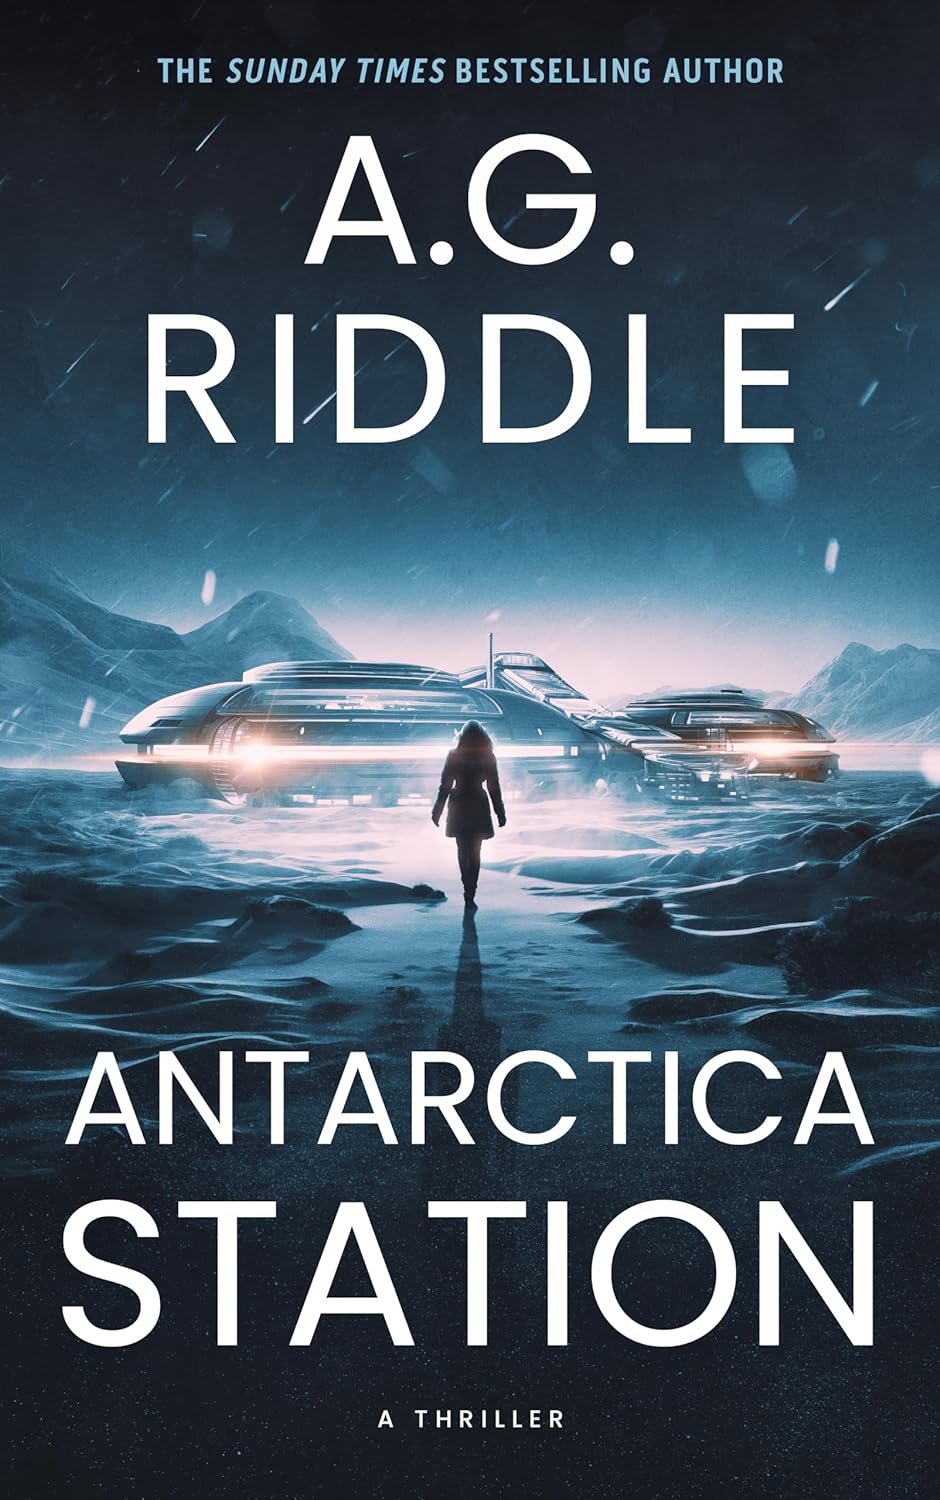 Review of Antarctica Station